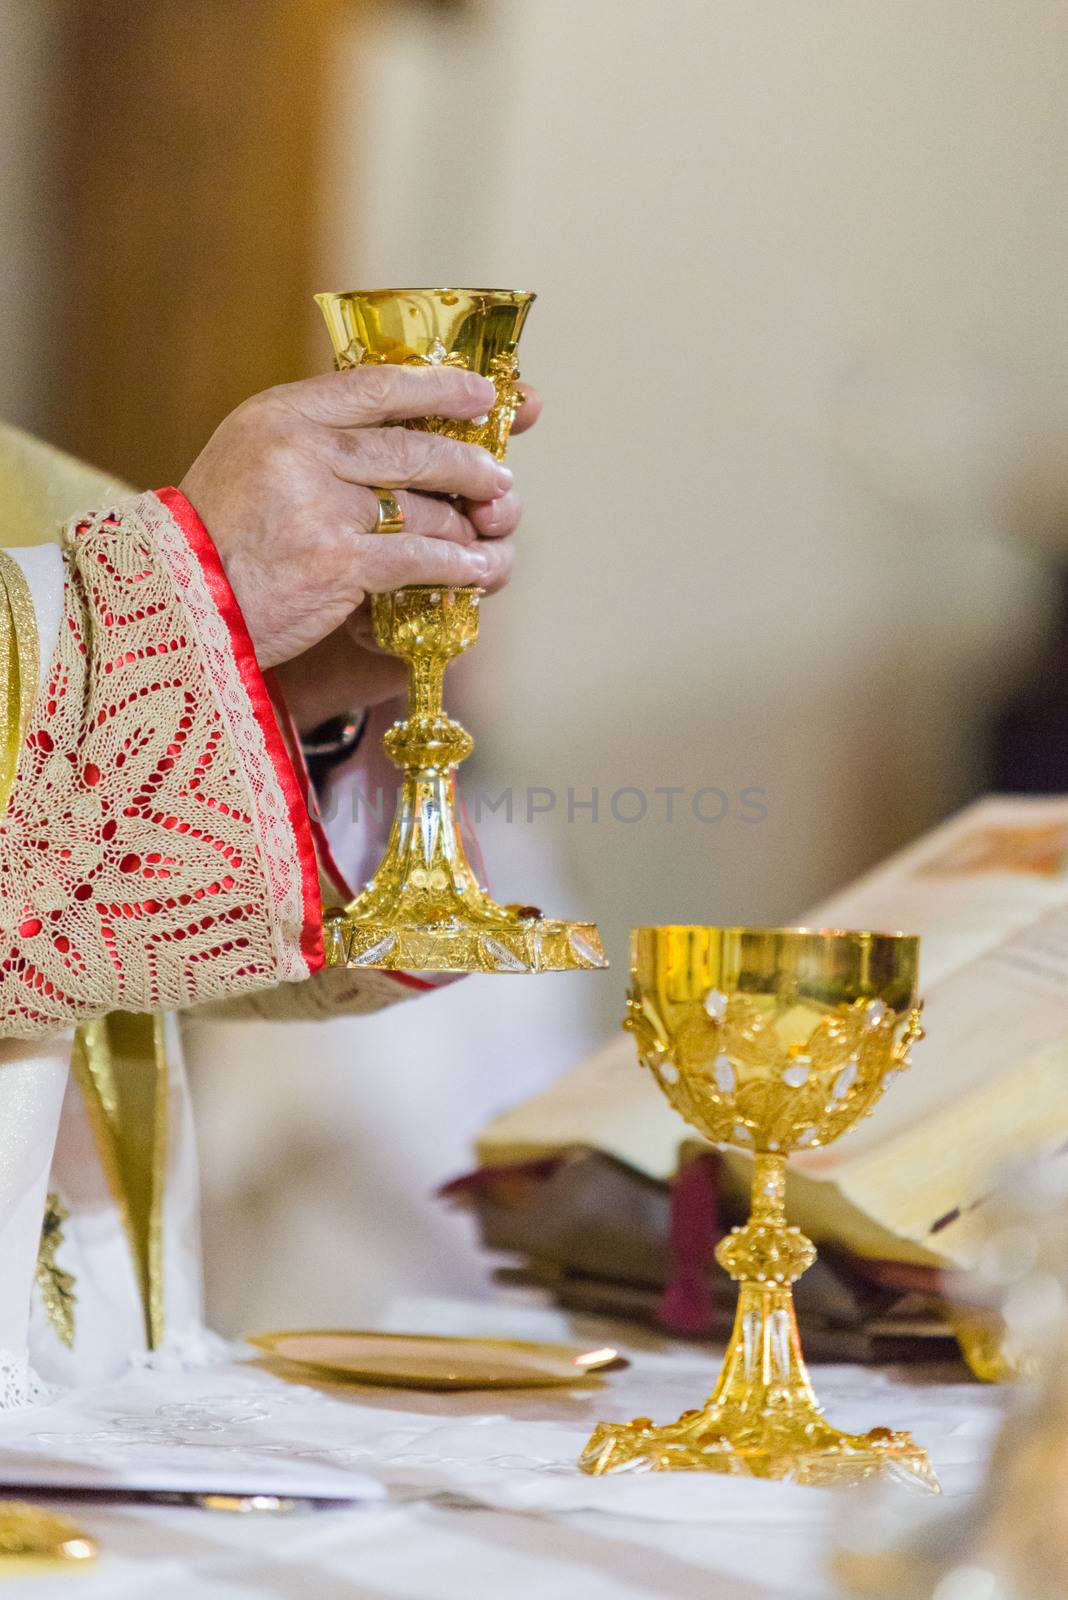 In the mass, during the communion